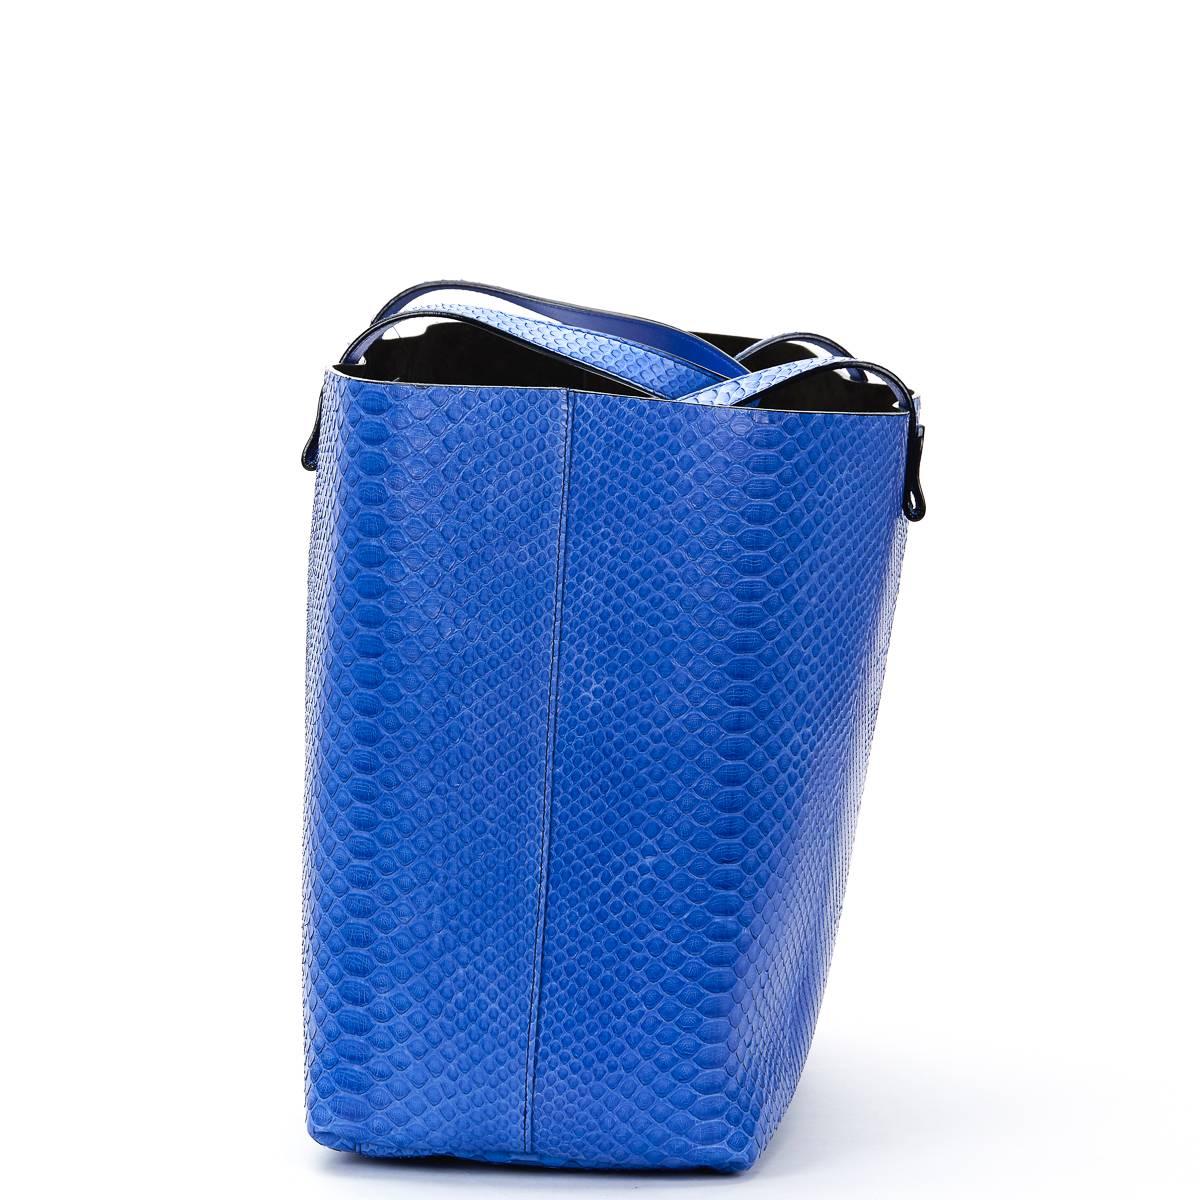 VICTORIA BECKHAM
Peacock Blue Python Leather Simple Shopper

Reference: HB500
Serial Number: No 73
Age (Circa): 2015
Accompanied By: Victoria Beckham Dust Bag, Care Cards
Authenticity Details: Style Number (Made in Italy)
Gender: Ladies
Type: